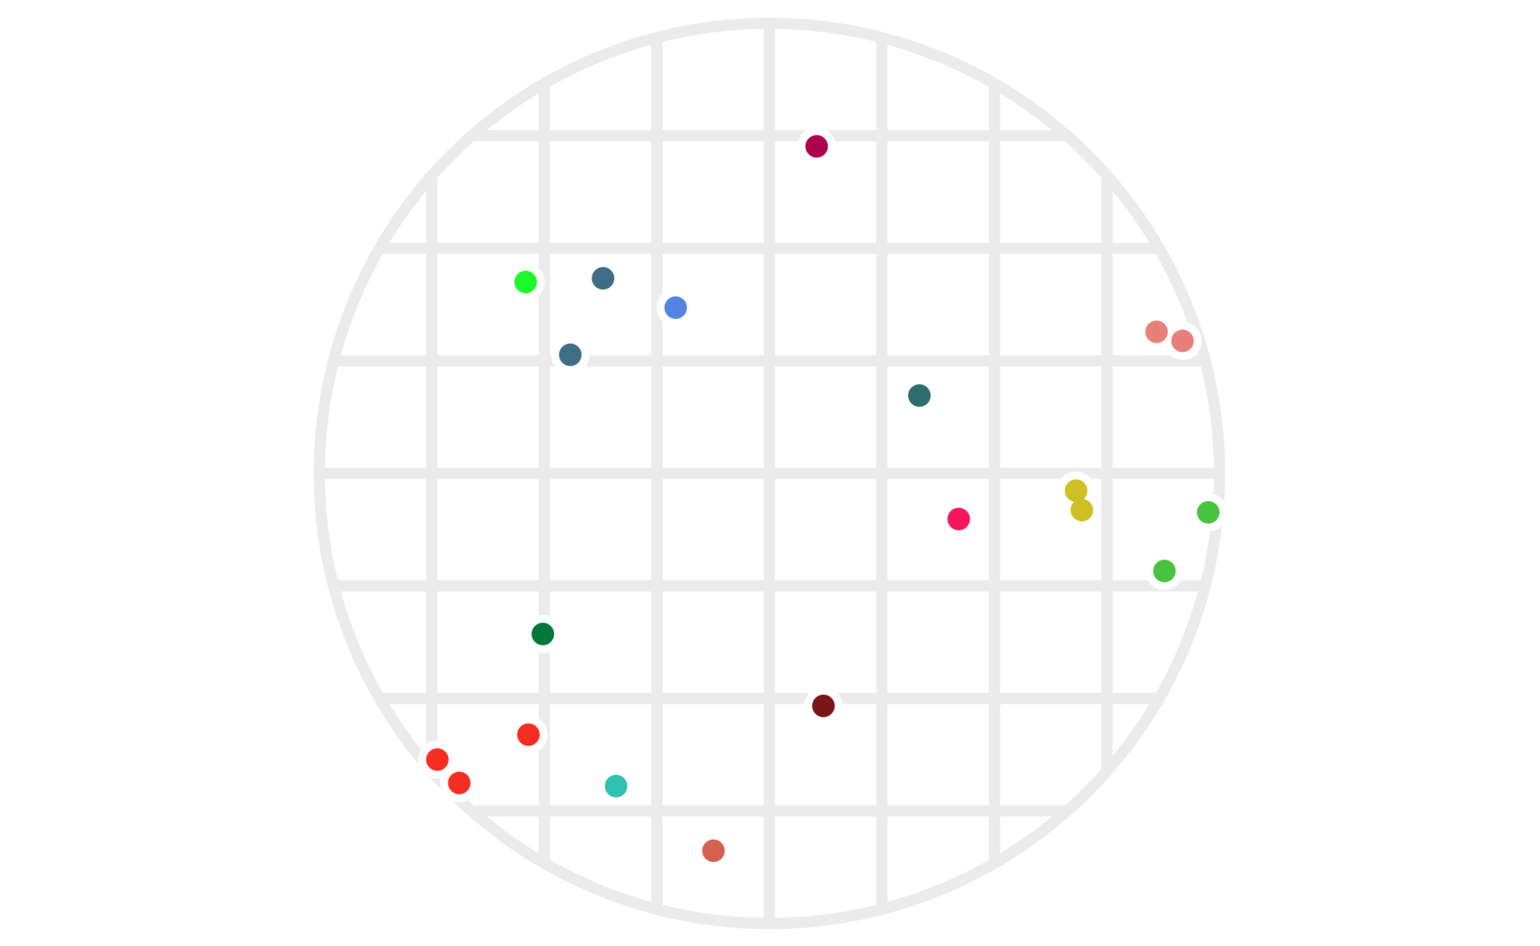 Figure 4: The same twenty points clustered via two different hashes — one using \lfloor x\rfloor, the other using \lfloor y\rfloor. As before, points are colored based on which cluster they’re in; a cluster is the set of all points who share both their \lfloor x\rfloor and their \lfloor y\rfloor values.